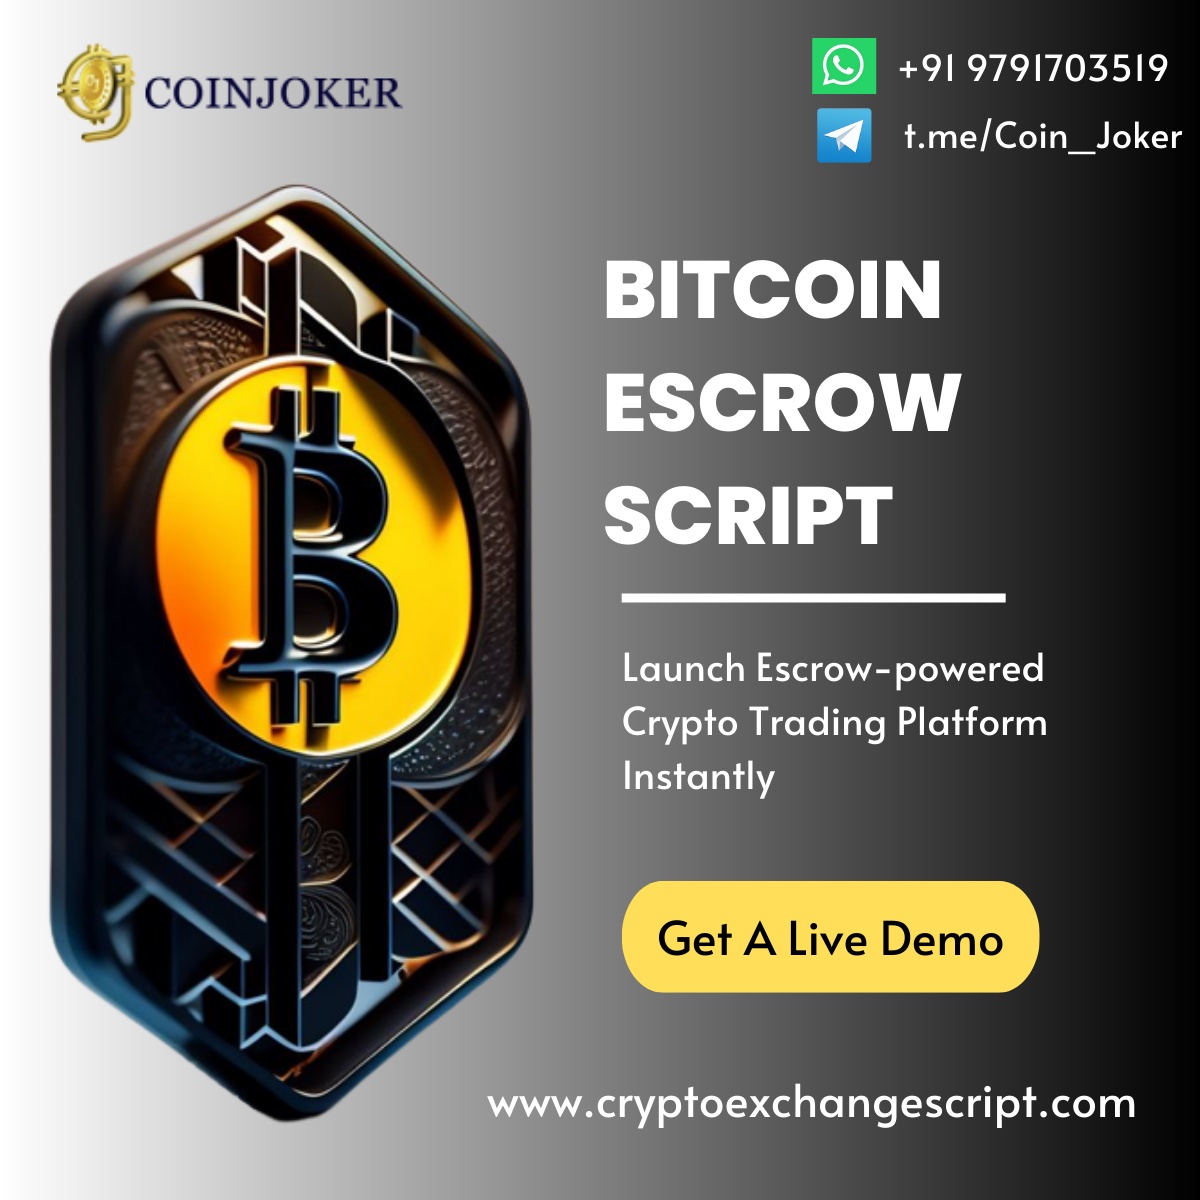 Step-by-Step Guide to Setting Up a Bitcoin Escrow Script for Your Website